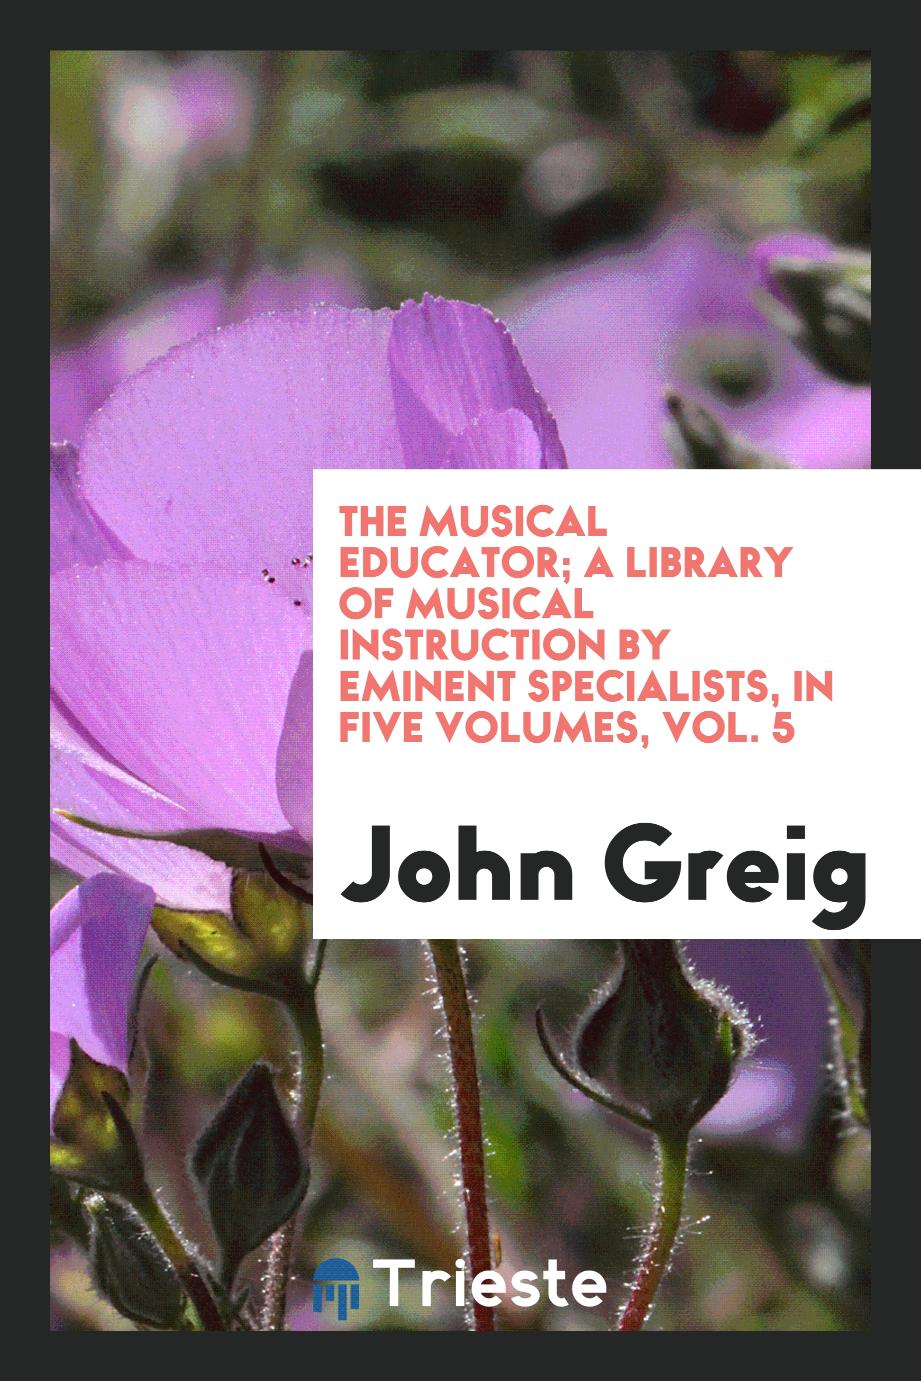 The musical educator; a library of musical instruction by eminent specialists, in five volumes, Vol. 5